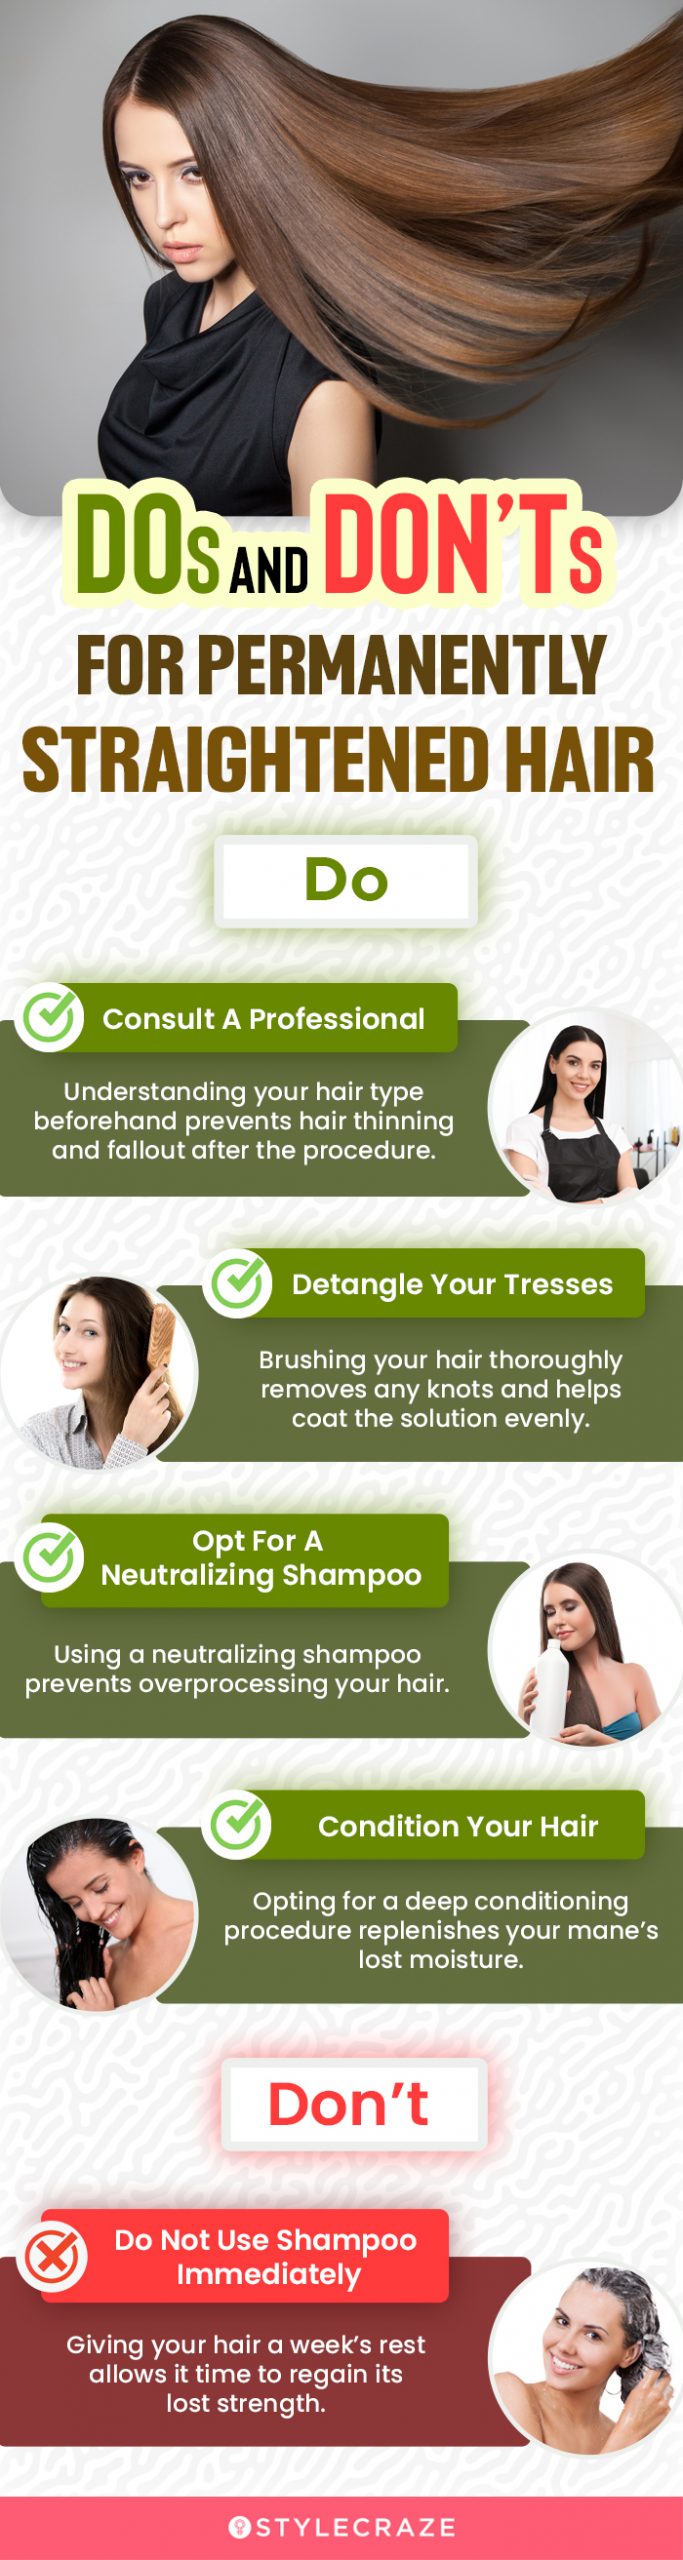 dos and don’ts for permanently straightened hair (infographic)